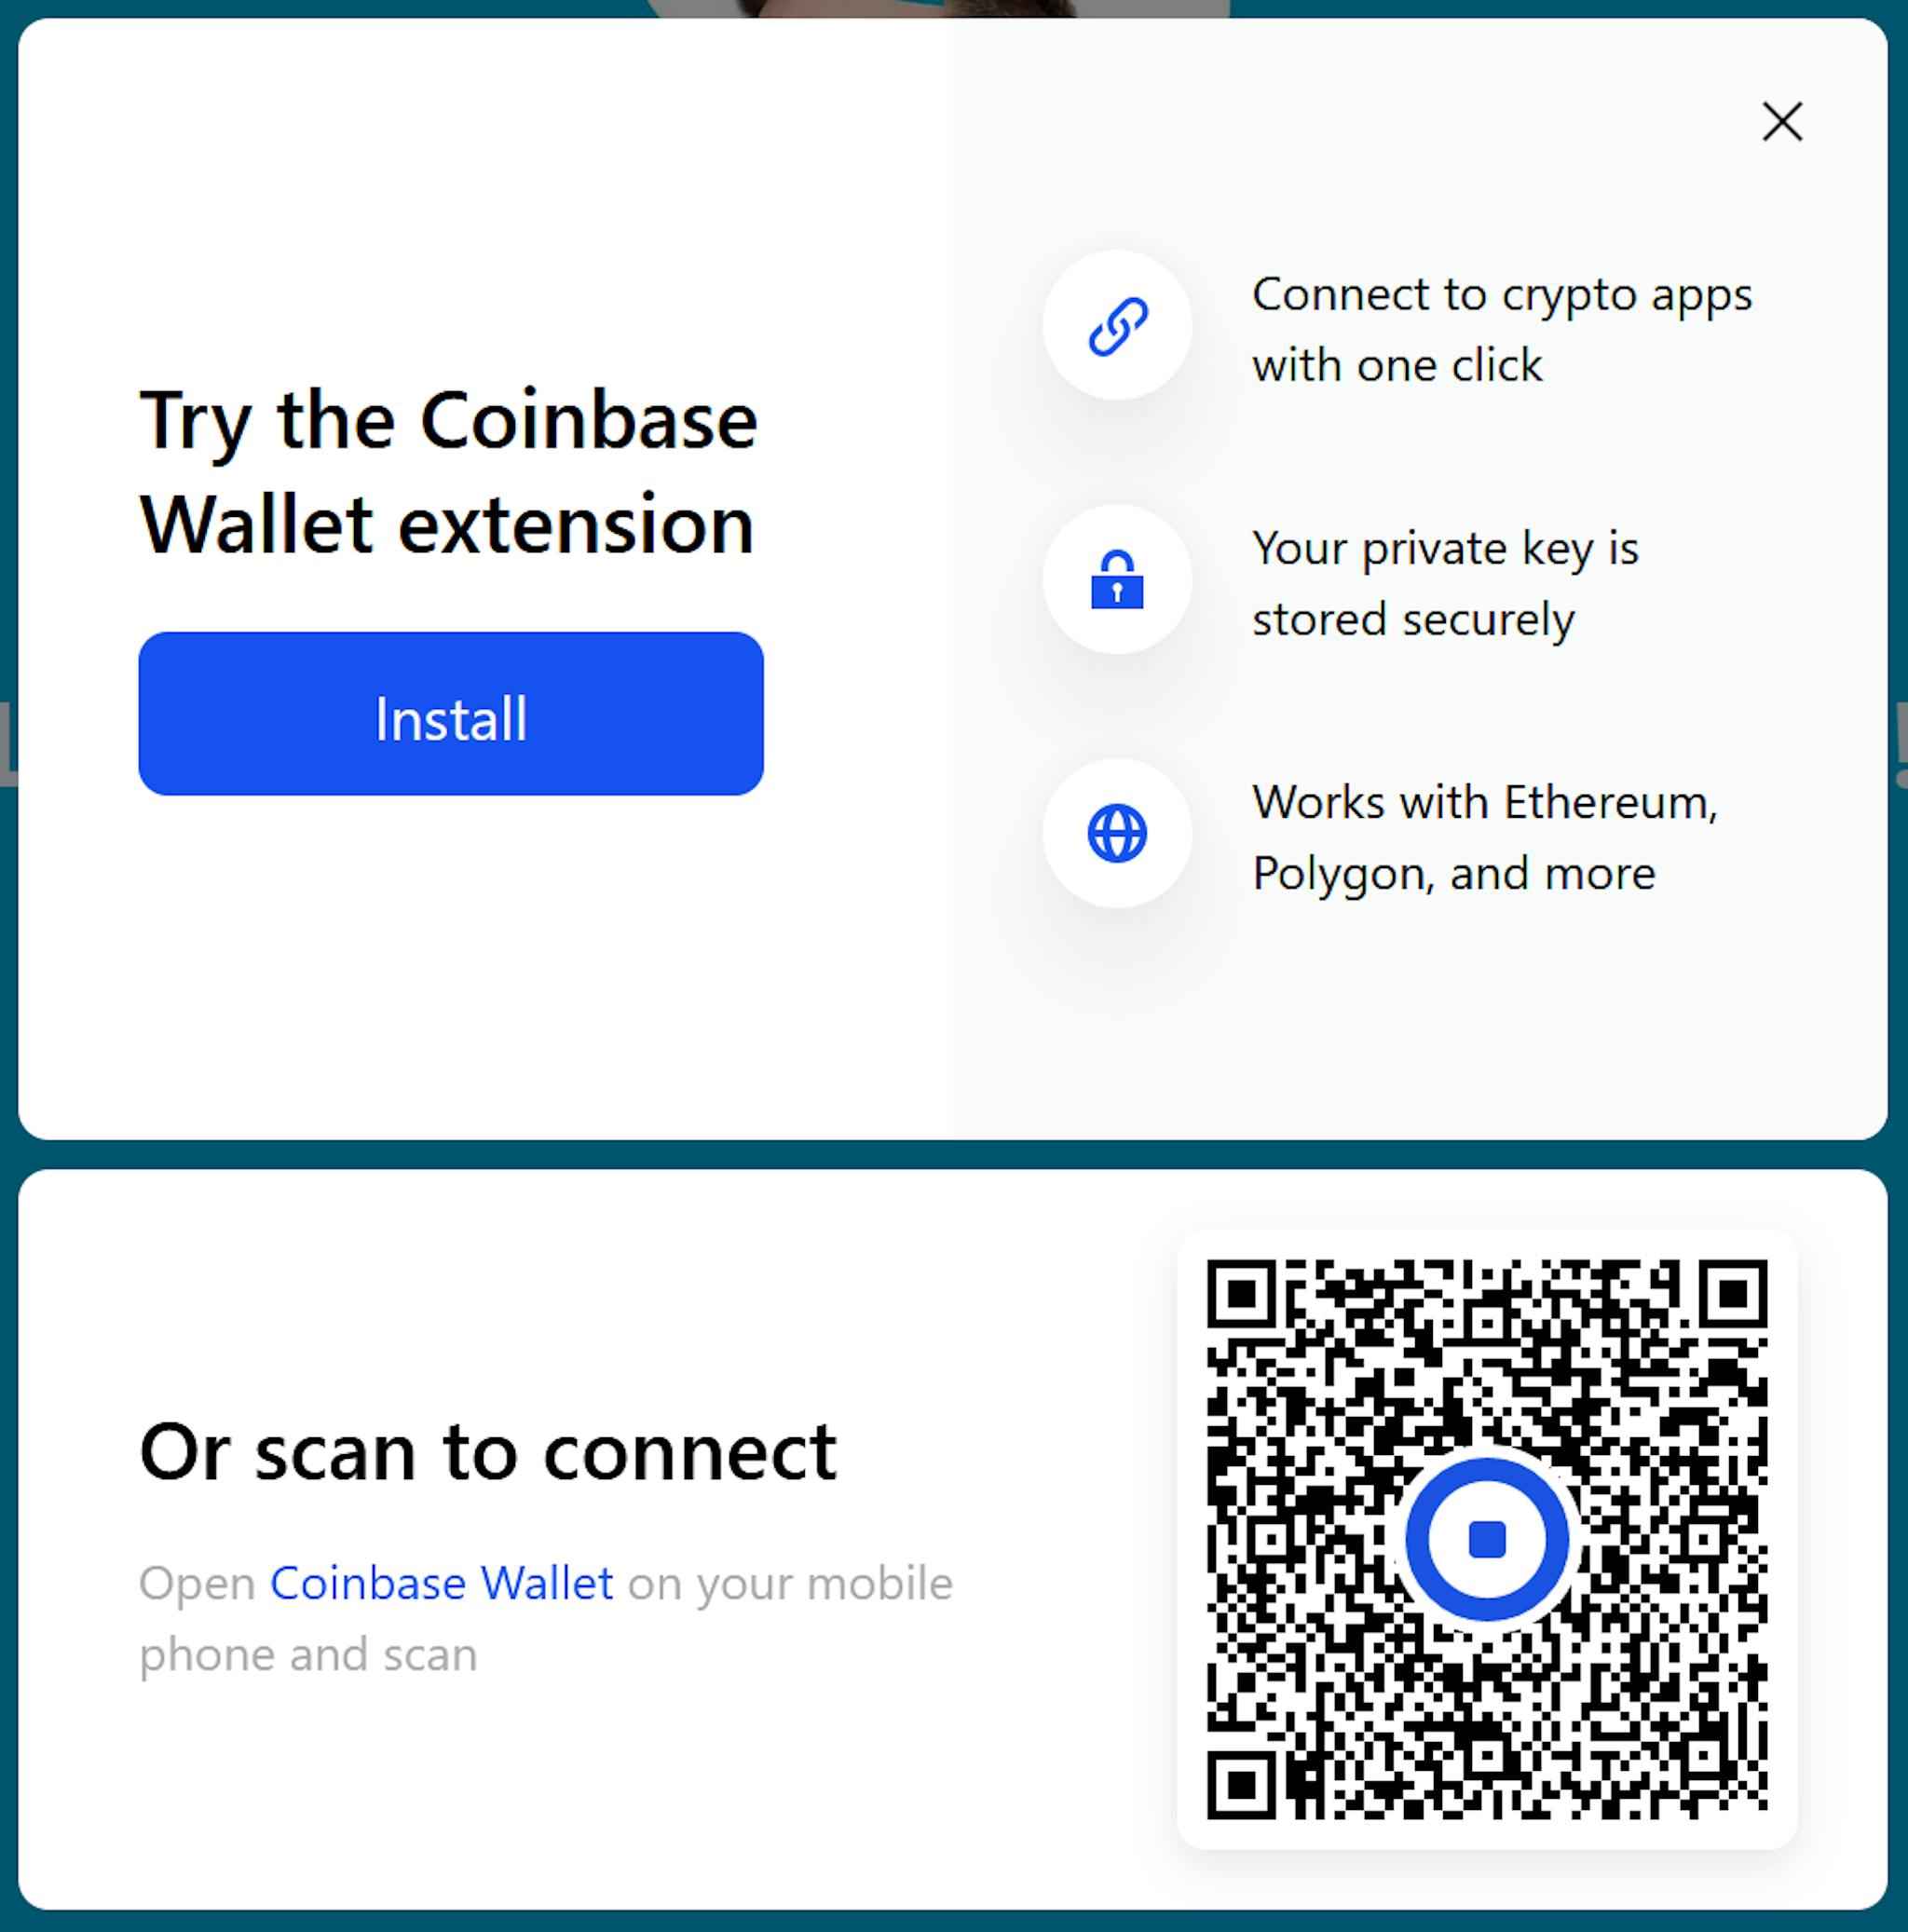 Coinbase Wallet’s onboarding UI